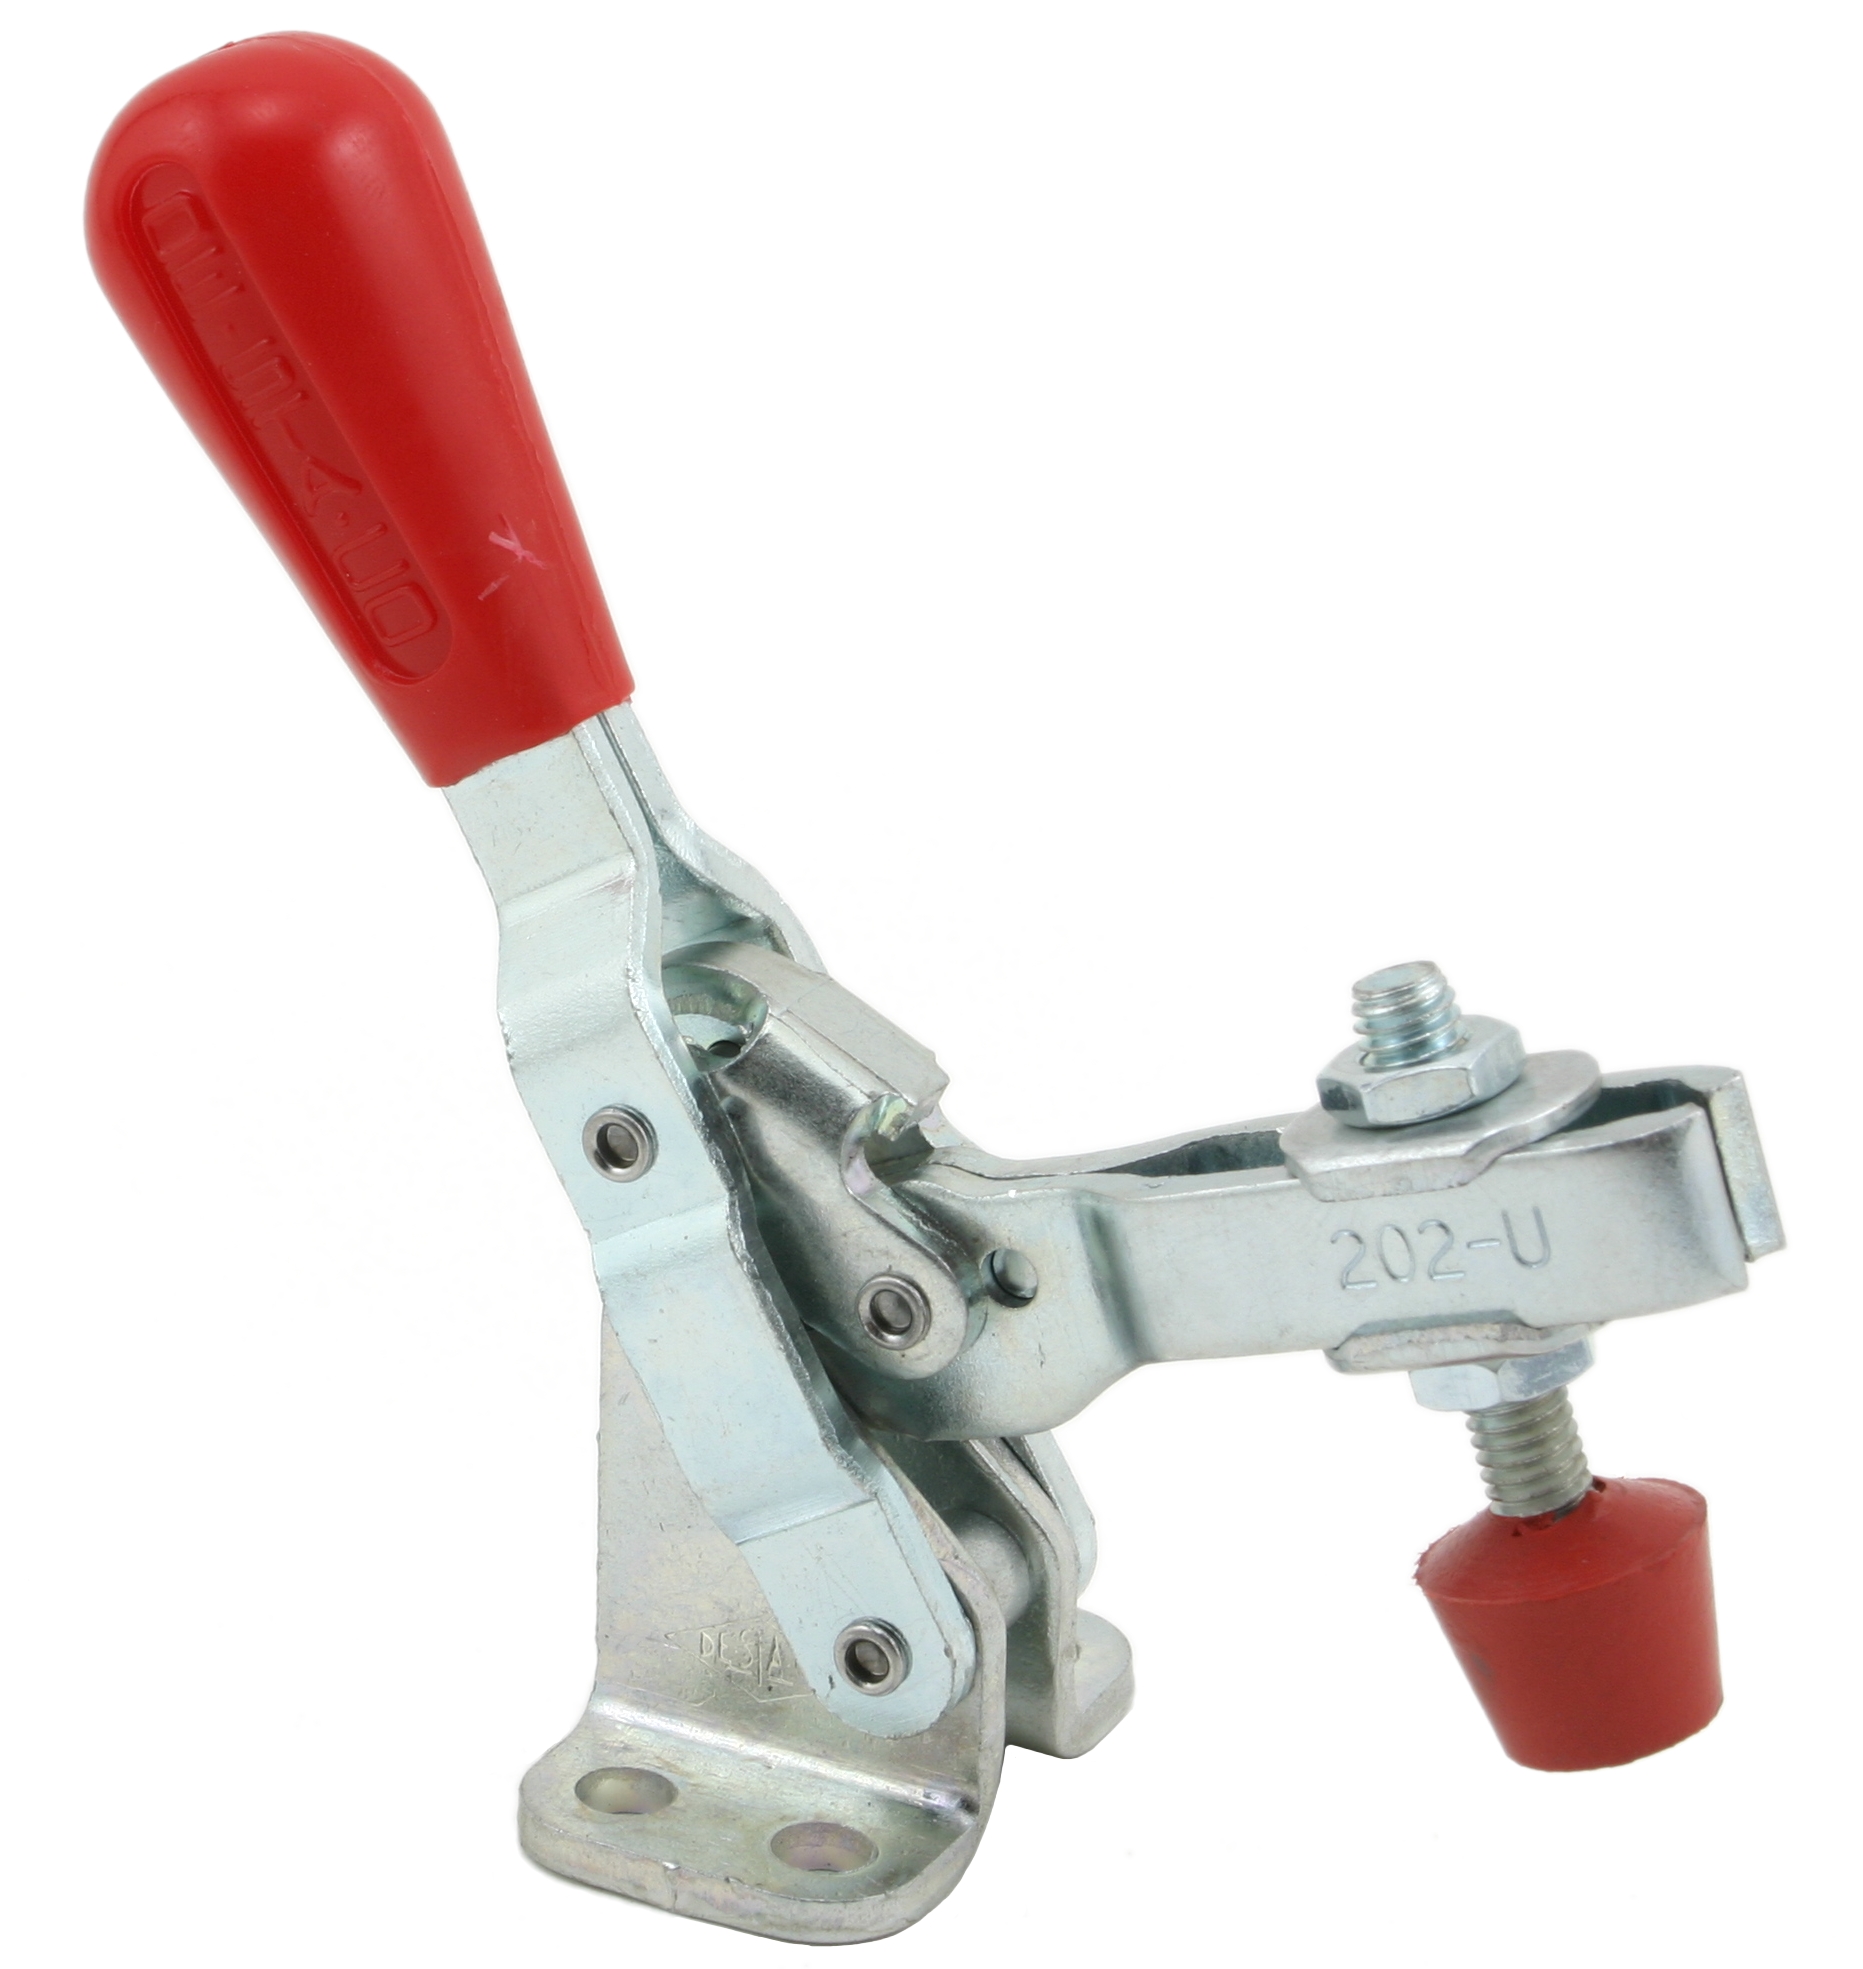 HOLD-DOWN CLAMP W/SPINDLE 202-U - Robert Larson Company